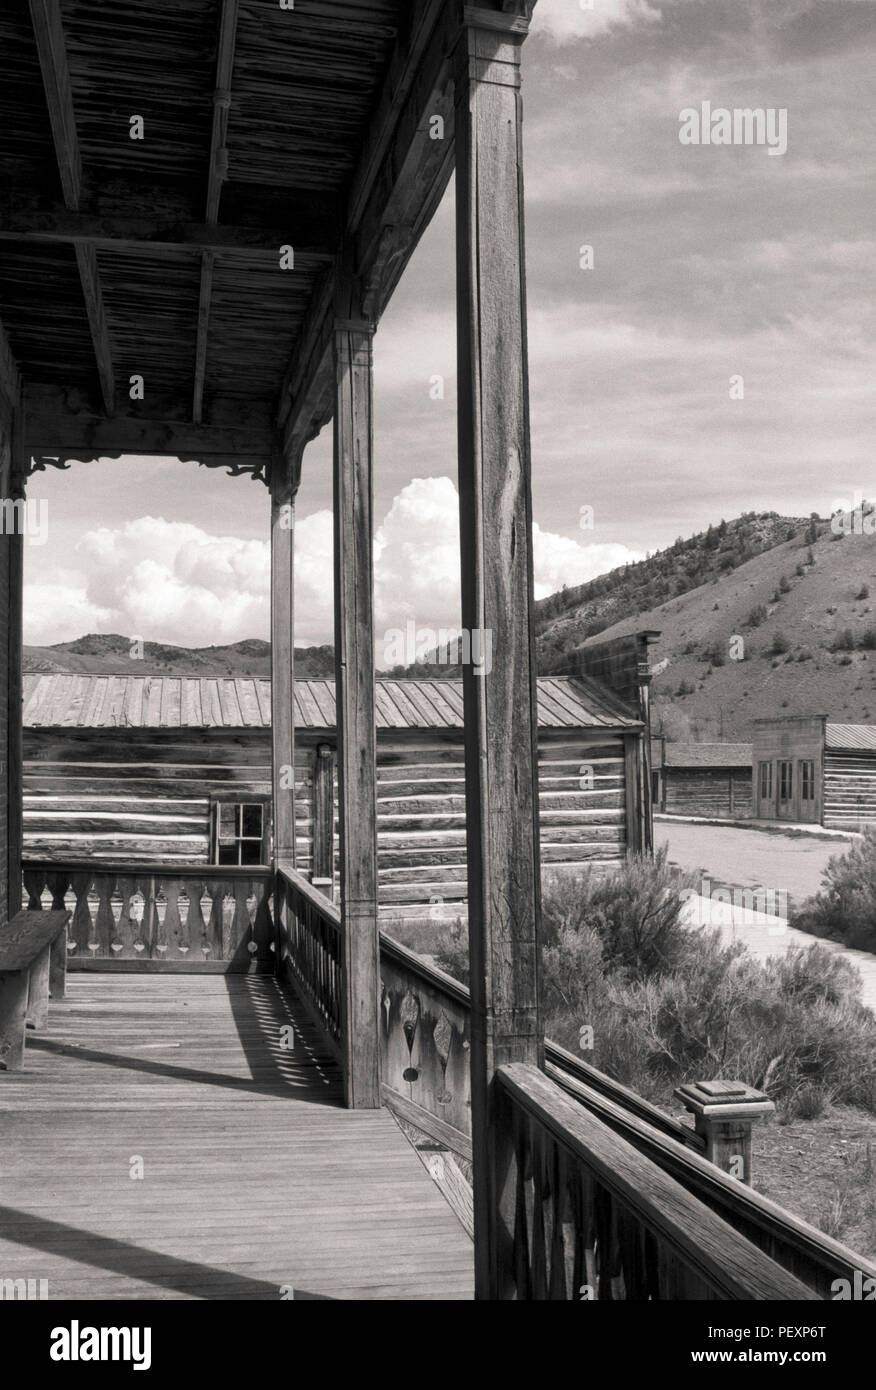 The Ghost Town of Bannack in Montana, taken from the porch of the Meade Hotel. Stock Photo